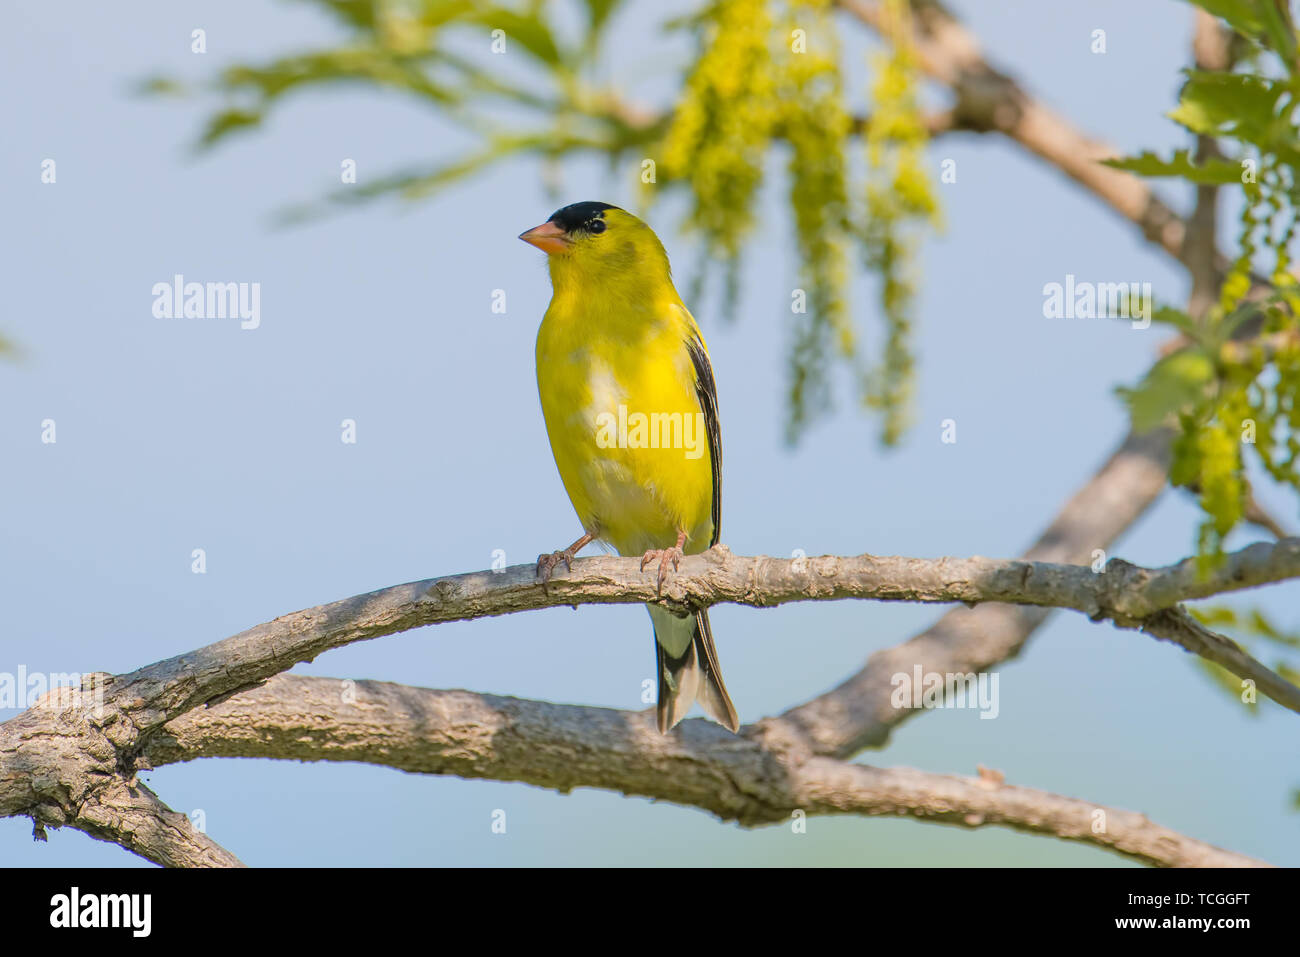 Goldfinch in breeding yellow plumage perched on a tree branch off the Minnesota River during Spring migrations Stock Photo